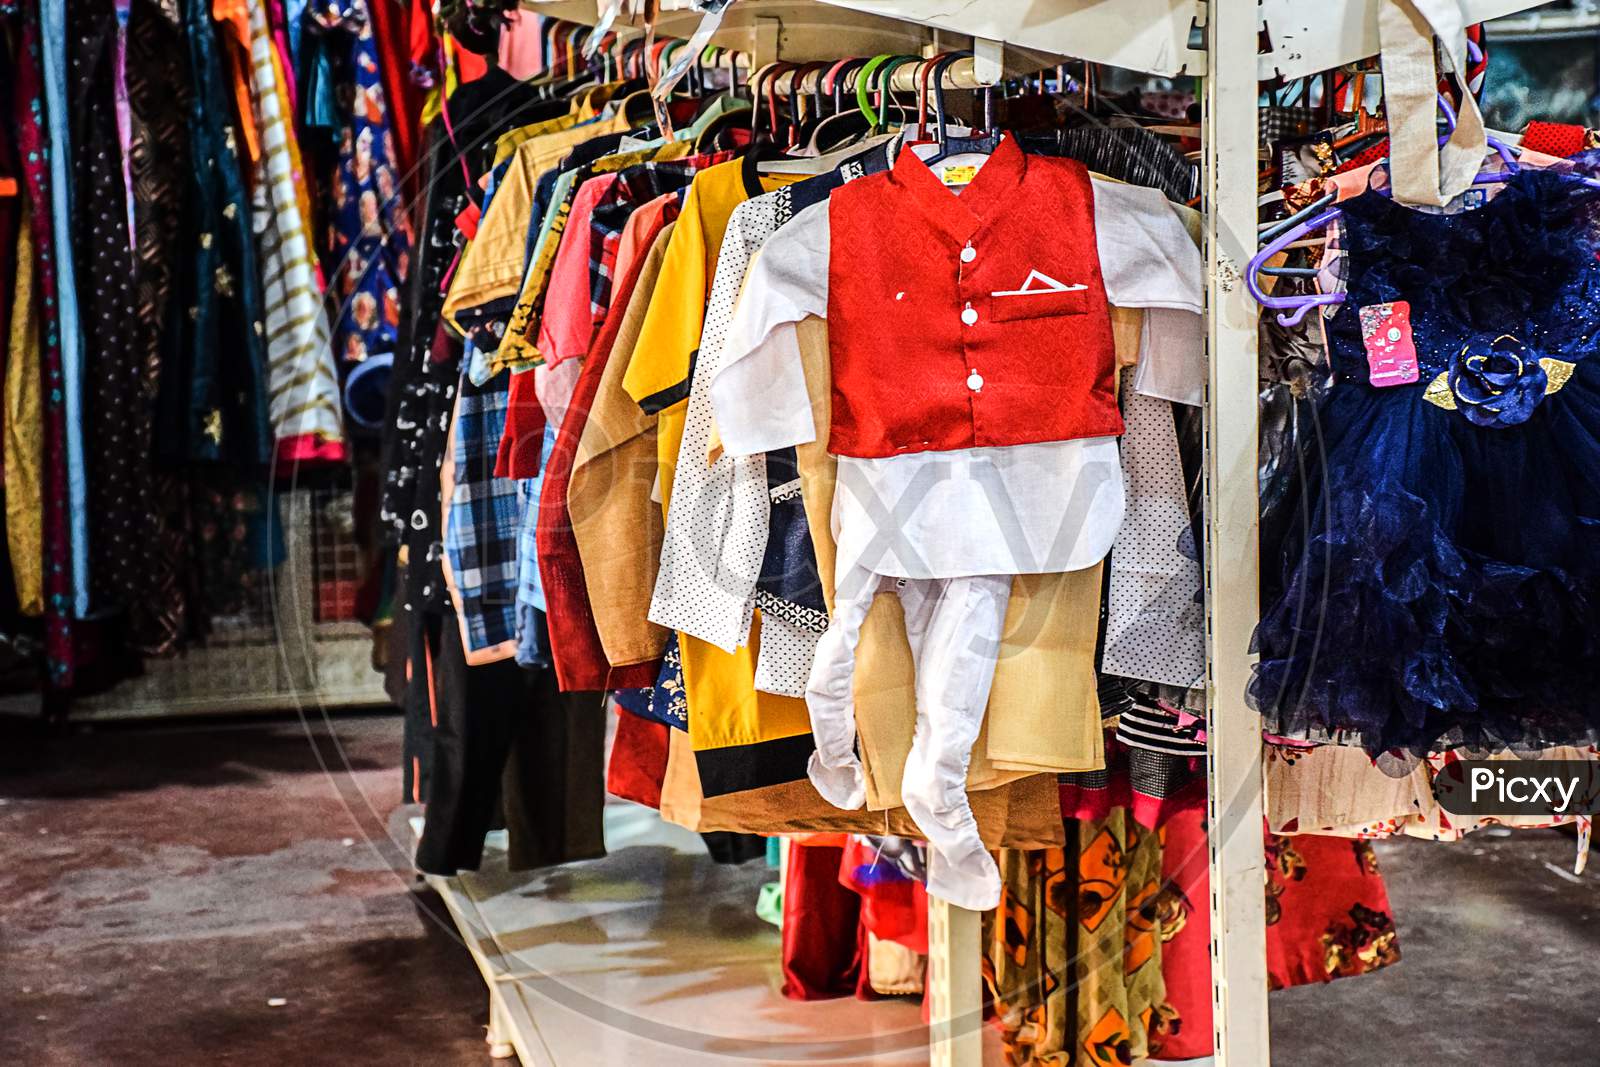 Stock Photo Of Children Cloths Hanging On Hanger In The Display Of Kids Clothing Store At Kolhapur Maharashtra India.